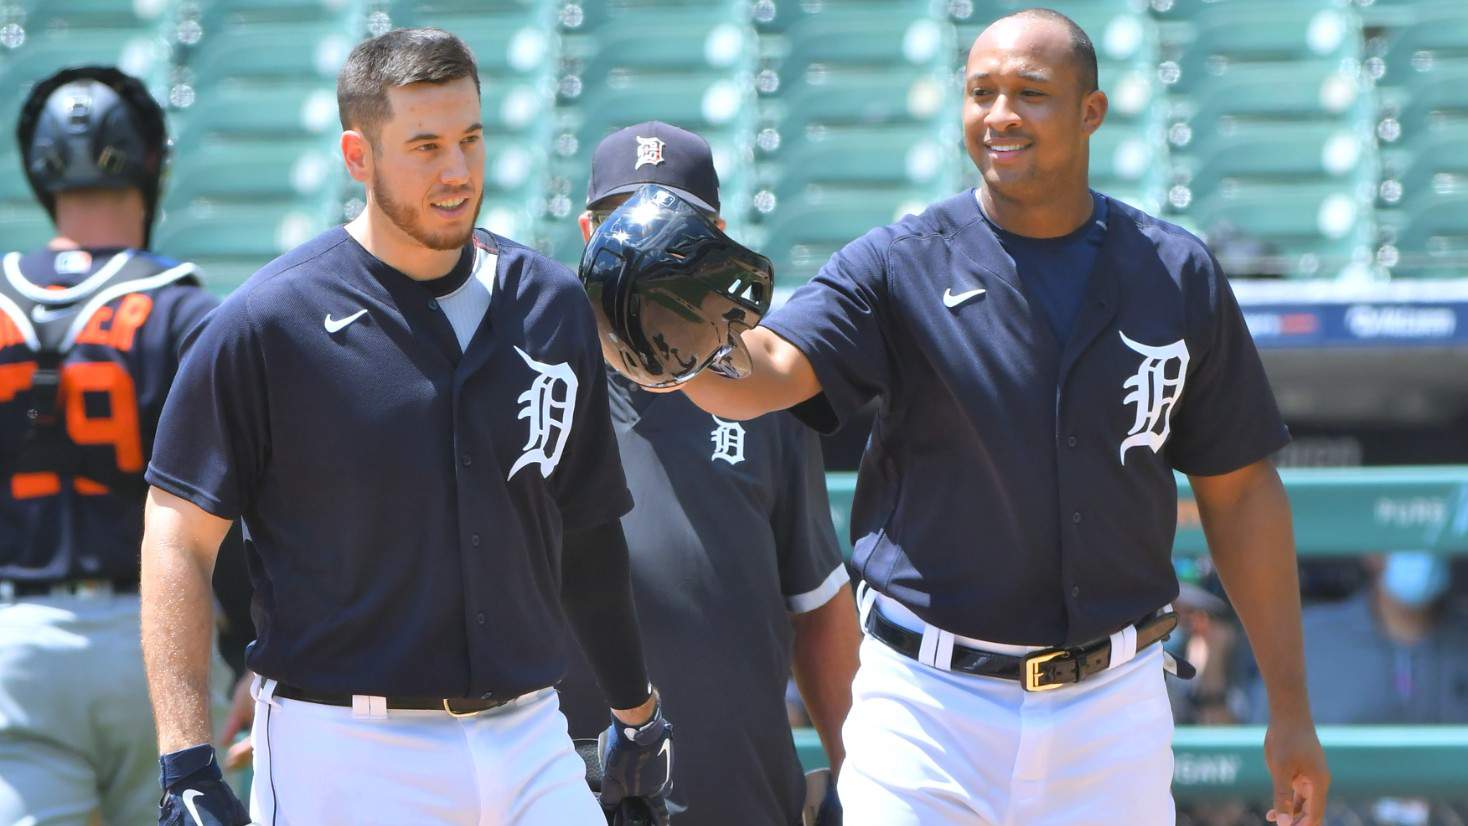 Tigers finish sweep of Twins, pull back to .500 with 3-2 win